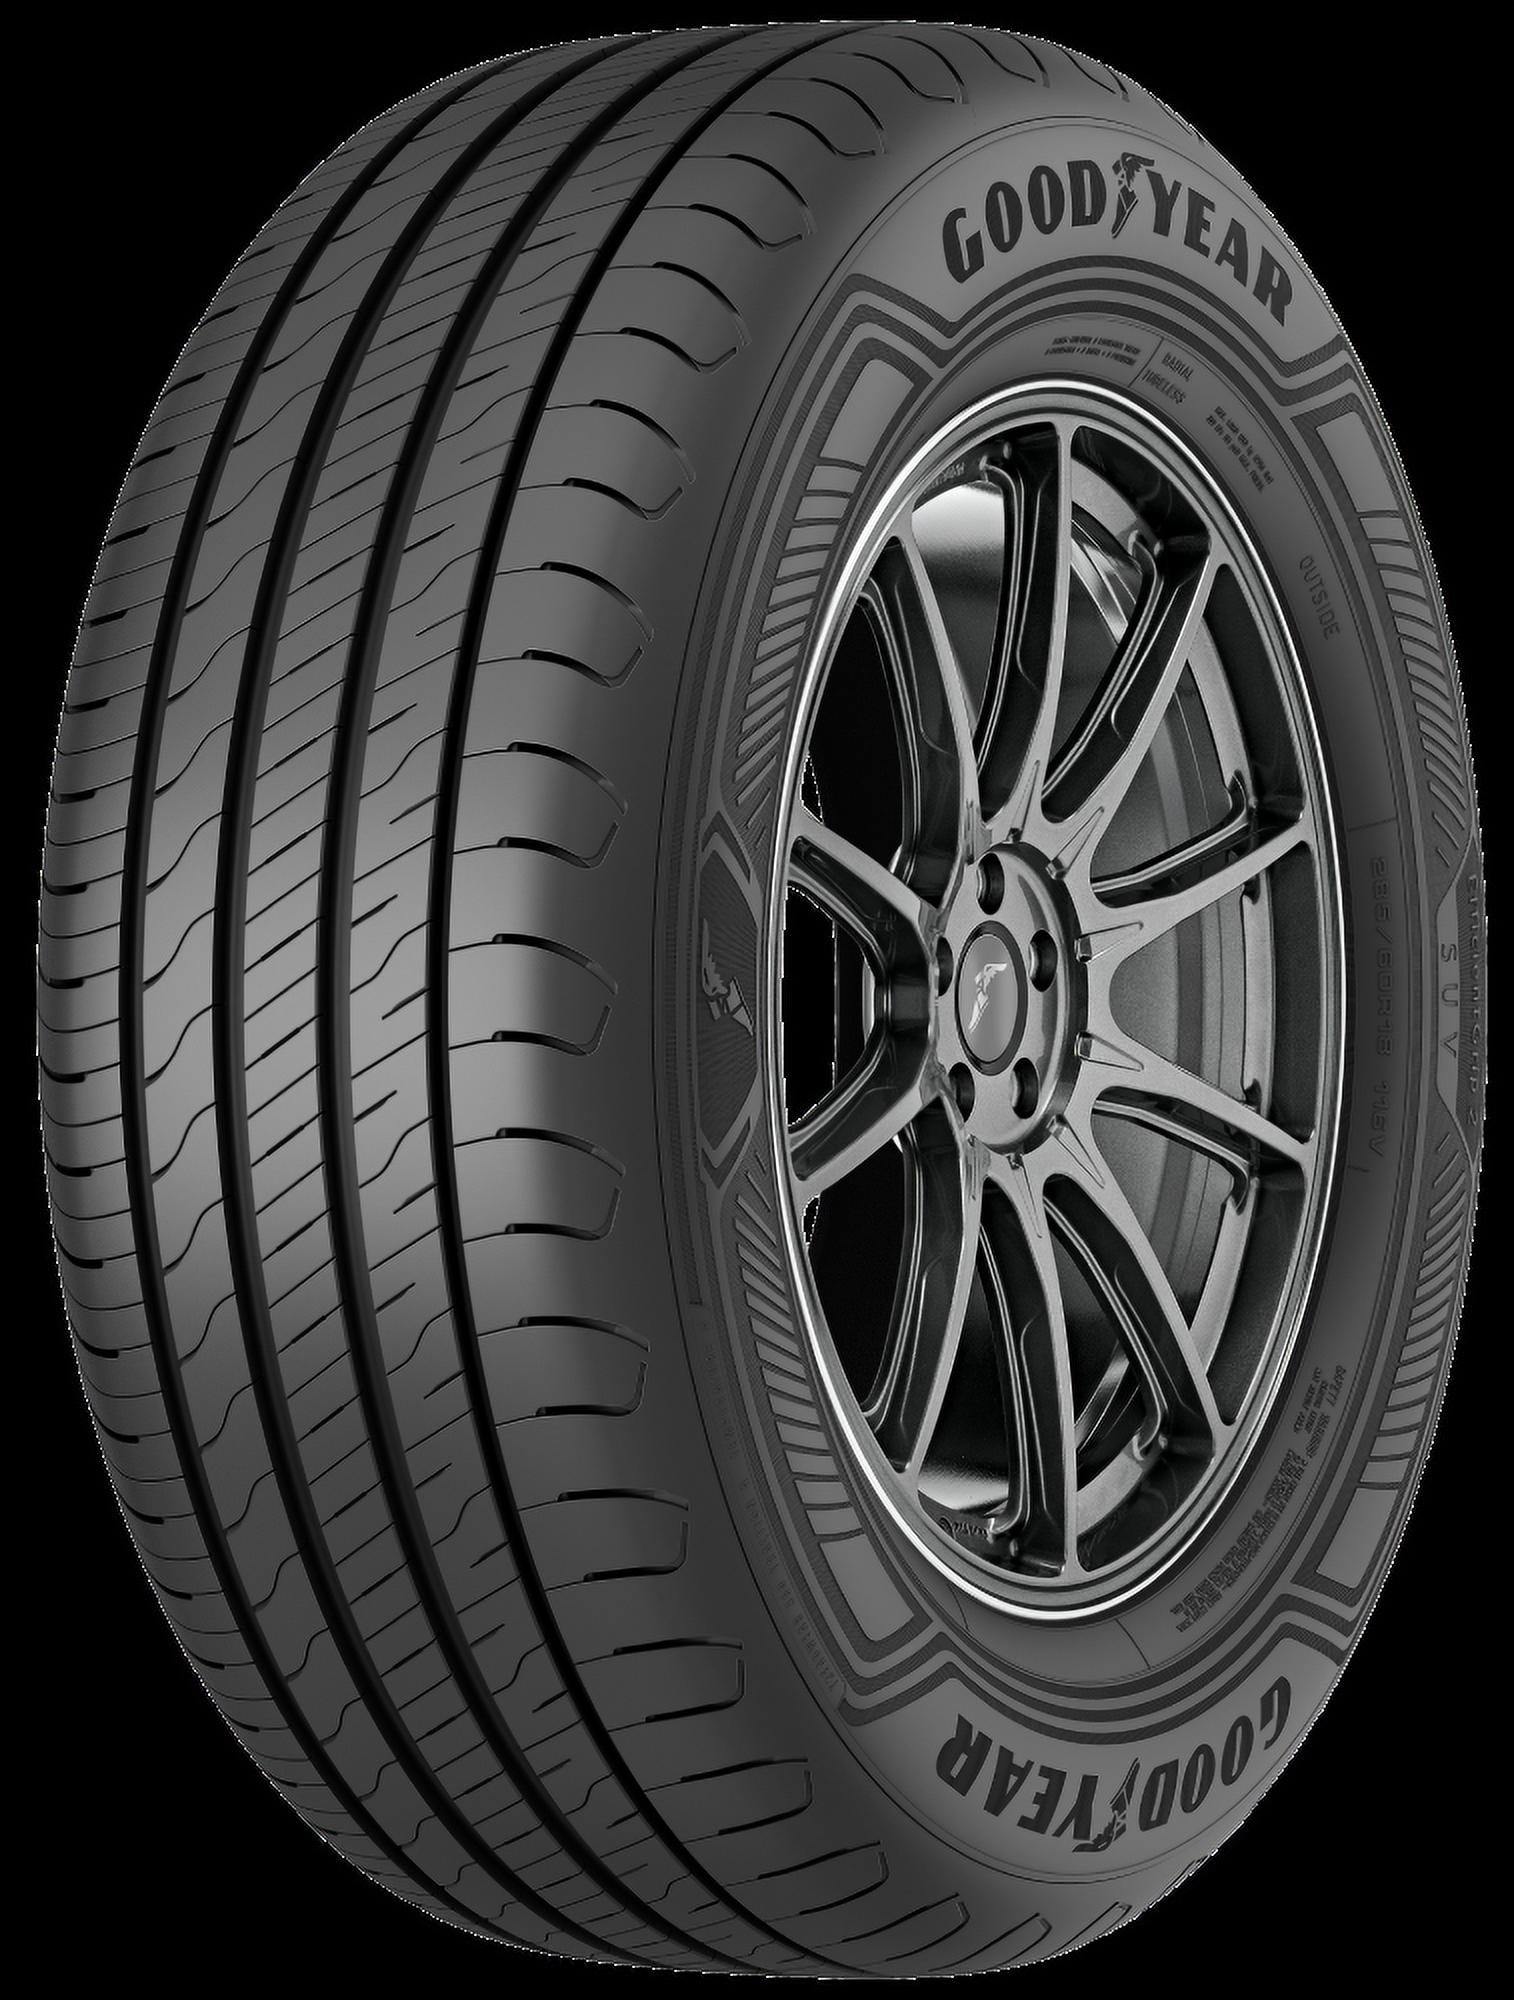 GOODYEAR EFFICIENT Electric 2012-18 94W PERFORMANCE Fits: 2 Chevrolet Cruze 2012-15 GRIP Ford Focus LT, 225/50R17